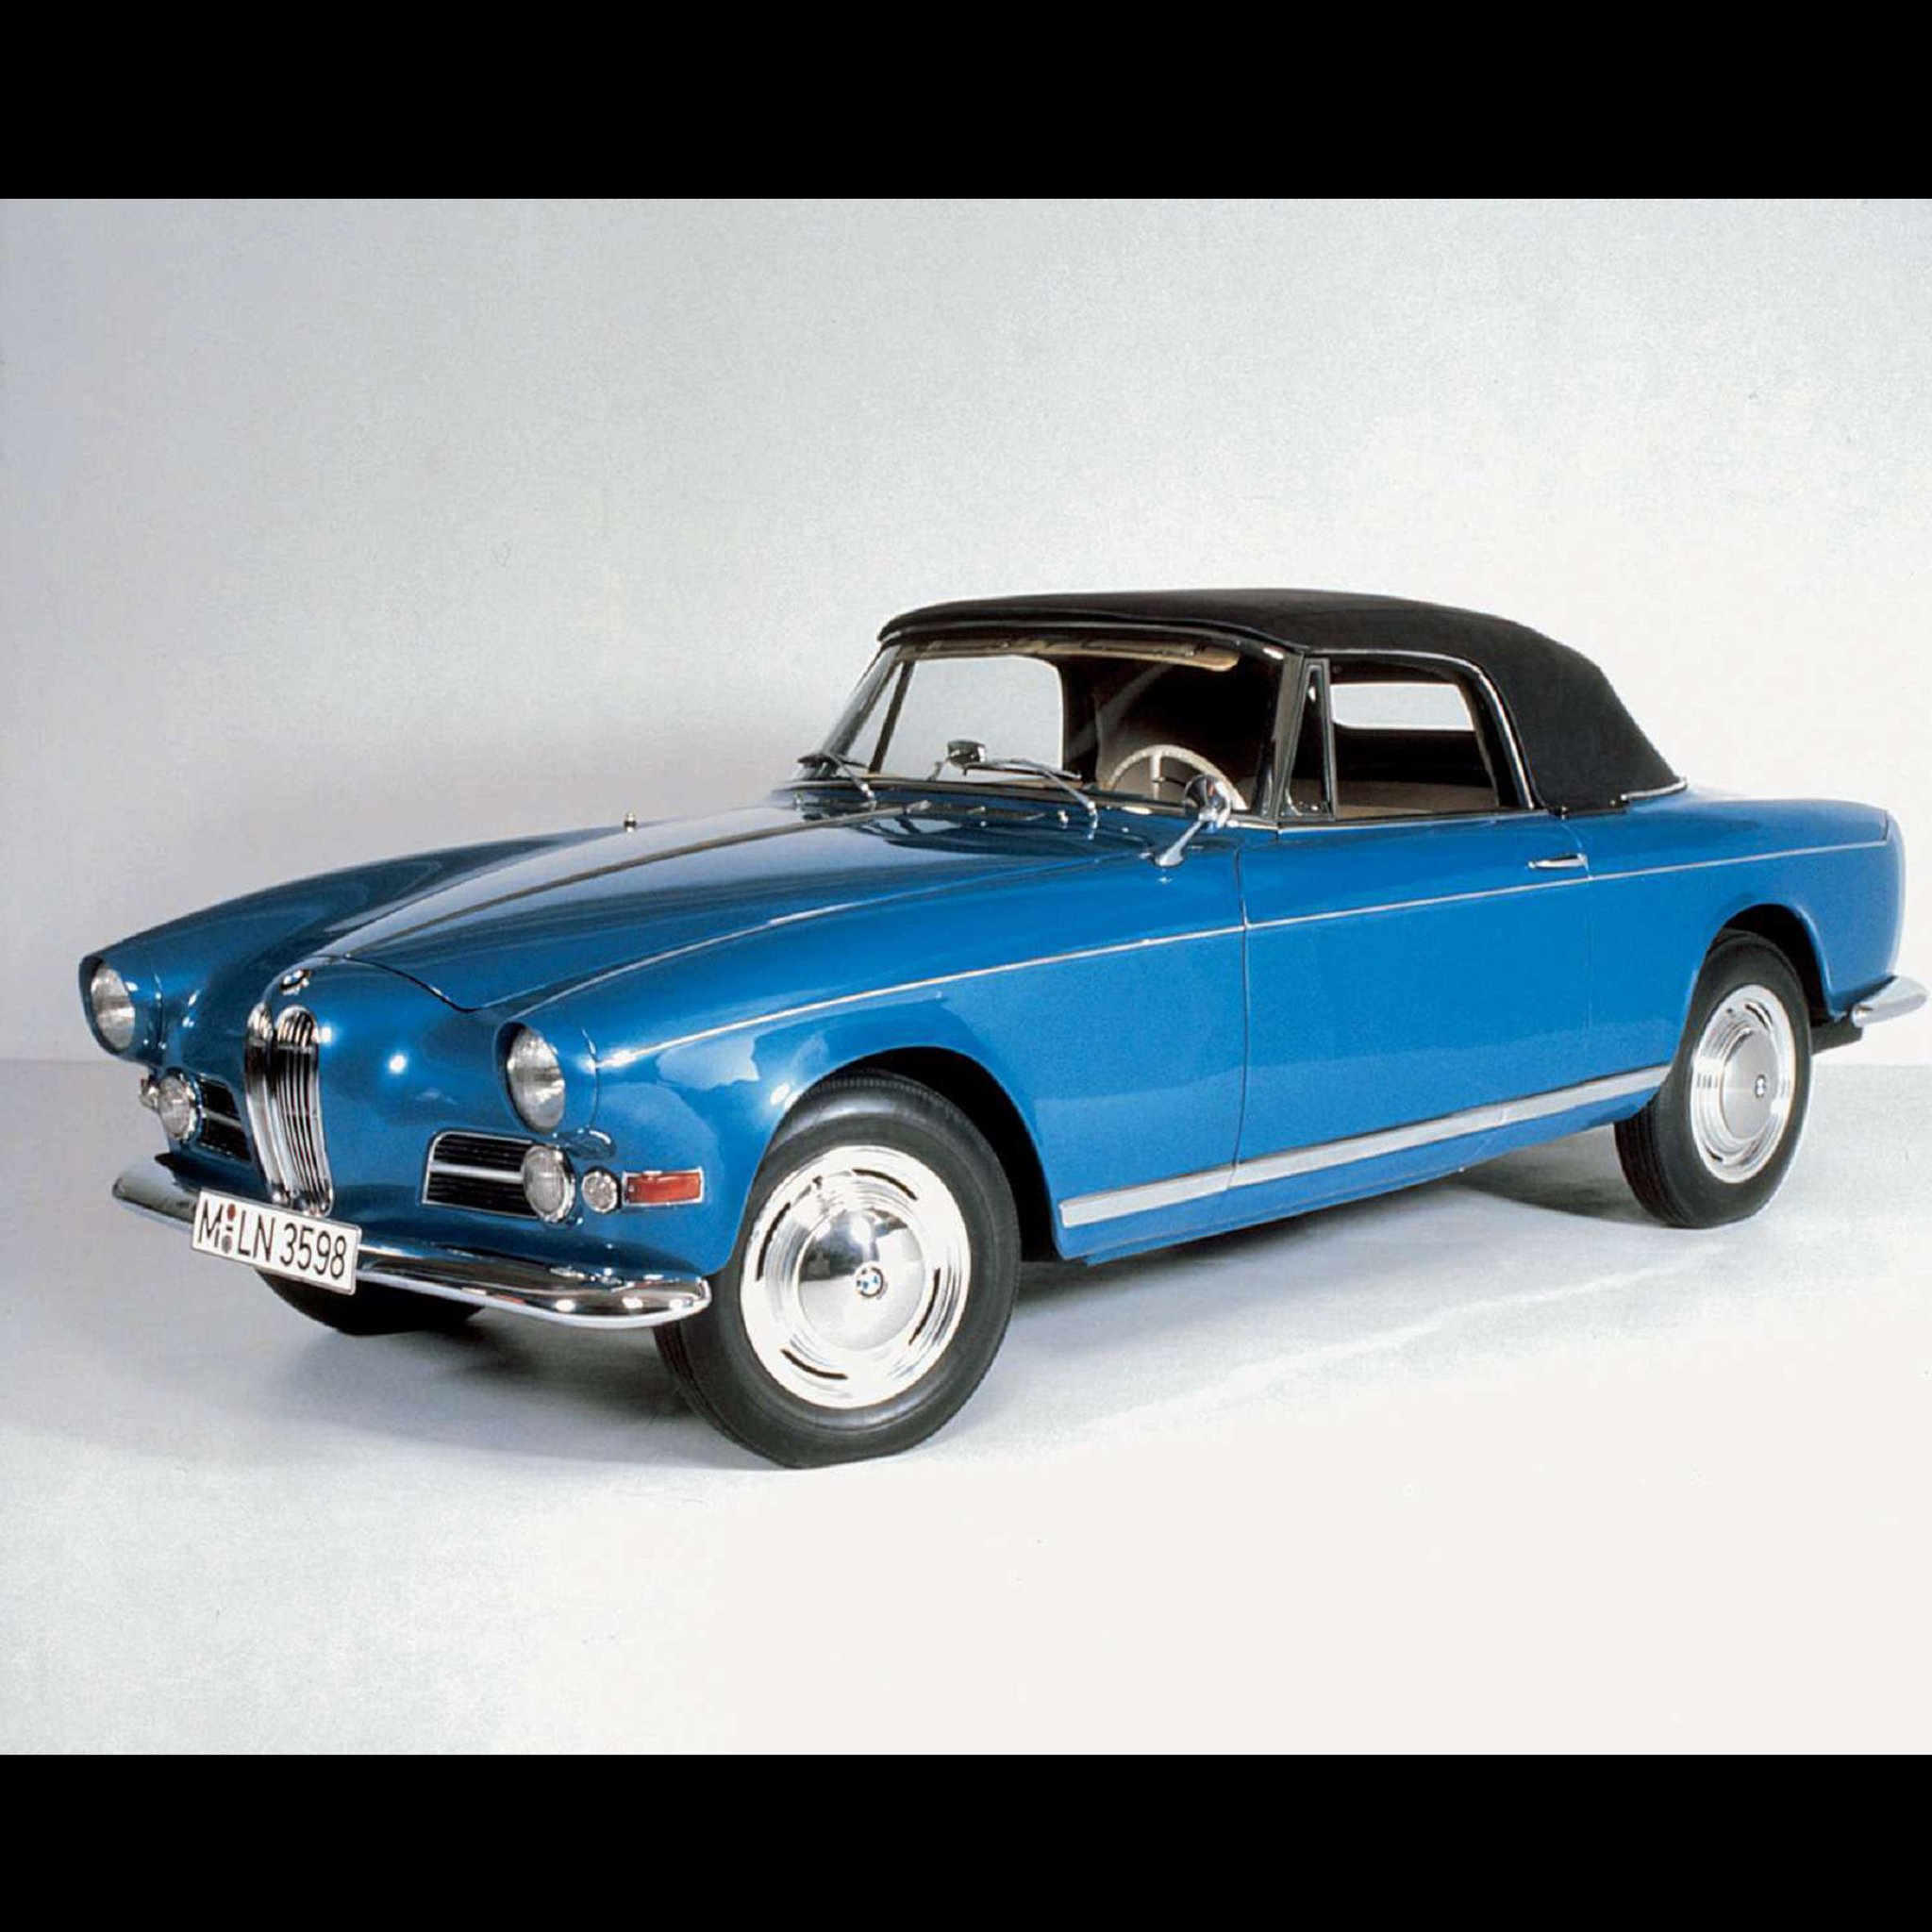 Original: 1956, Old BMW 503, Cabriolet, 001, Cool Cars iPad wallpapers and